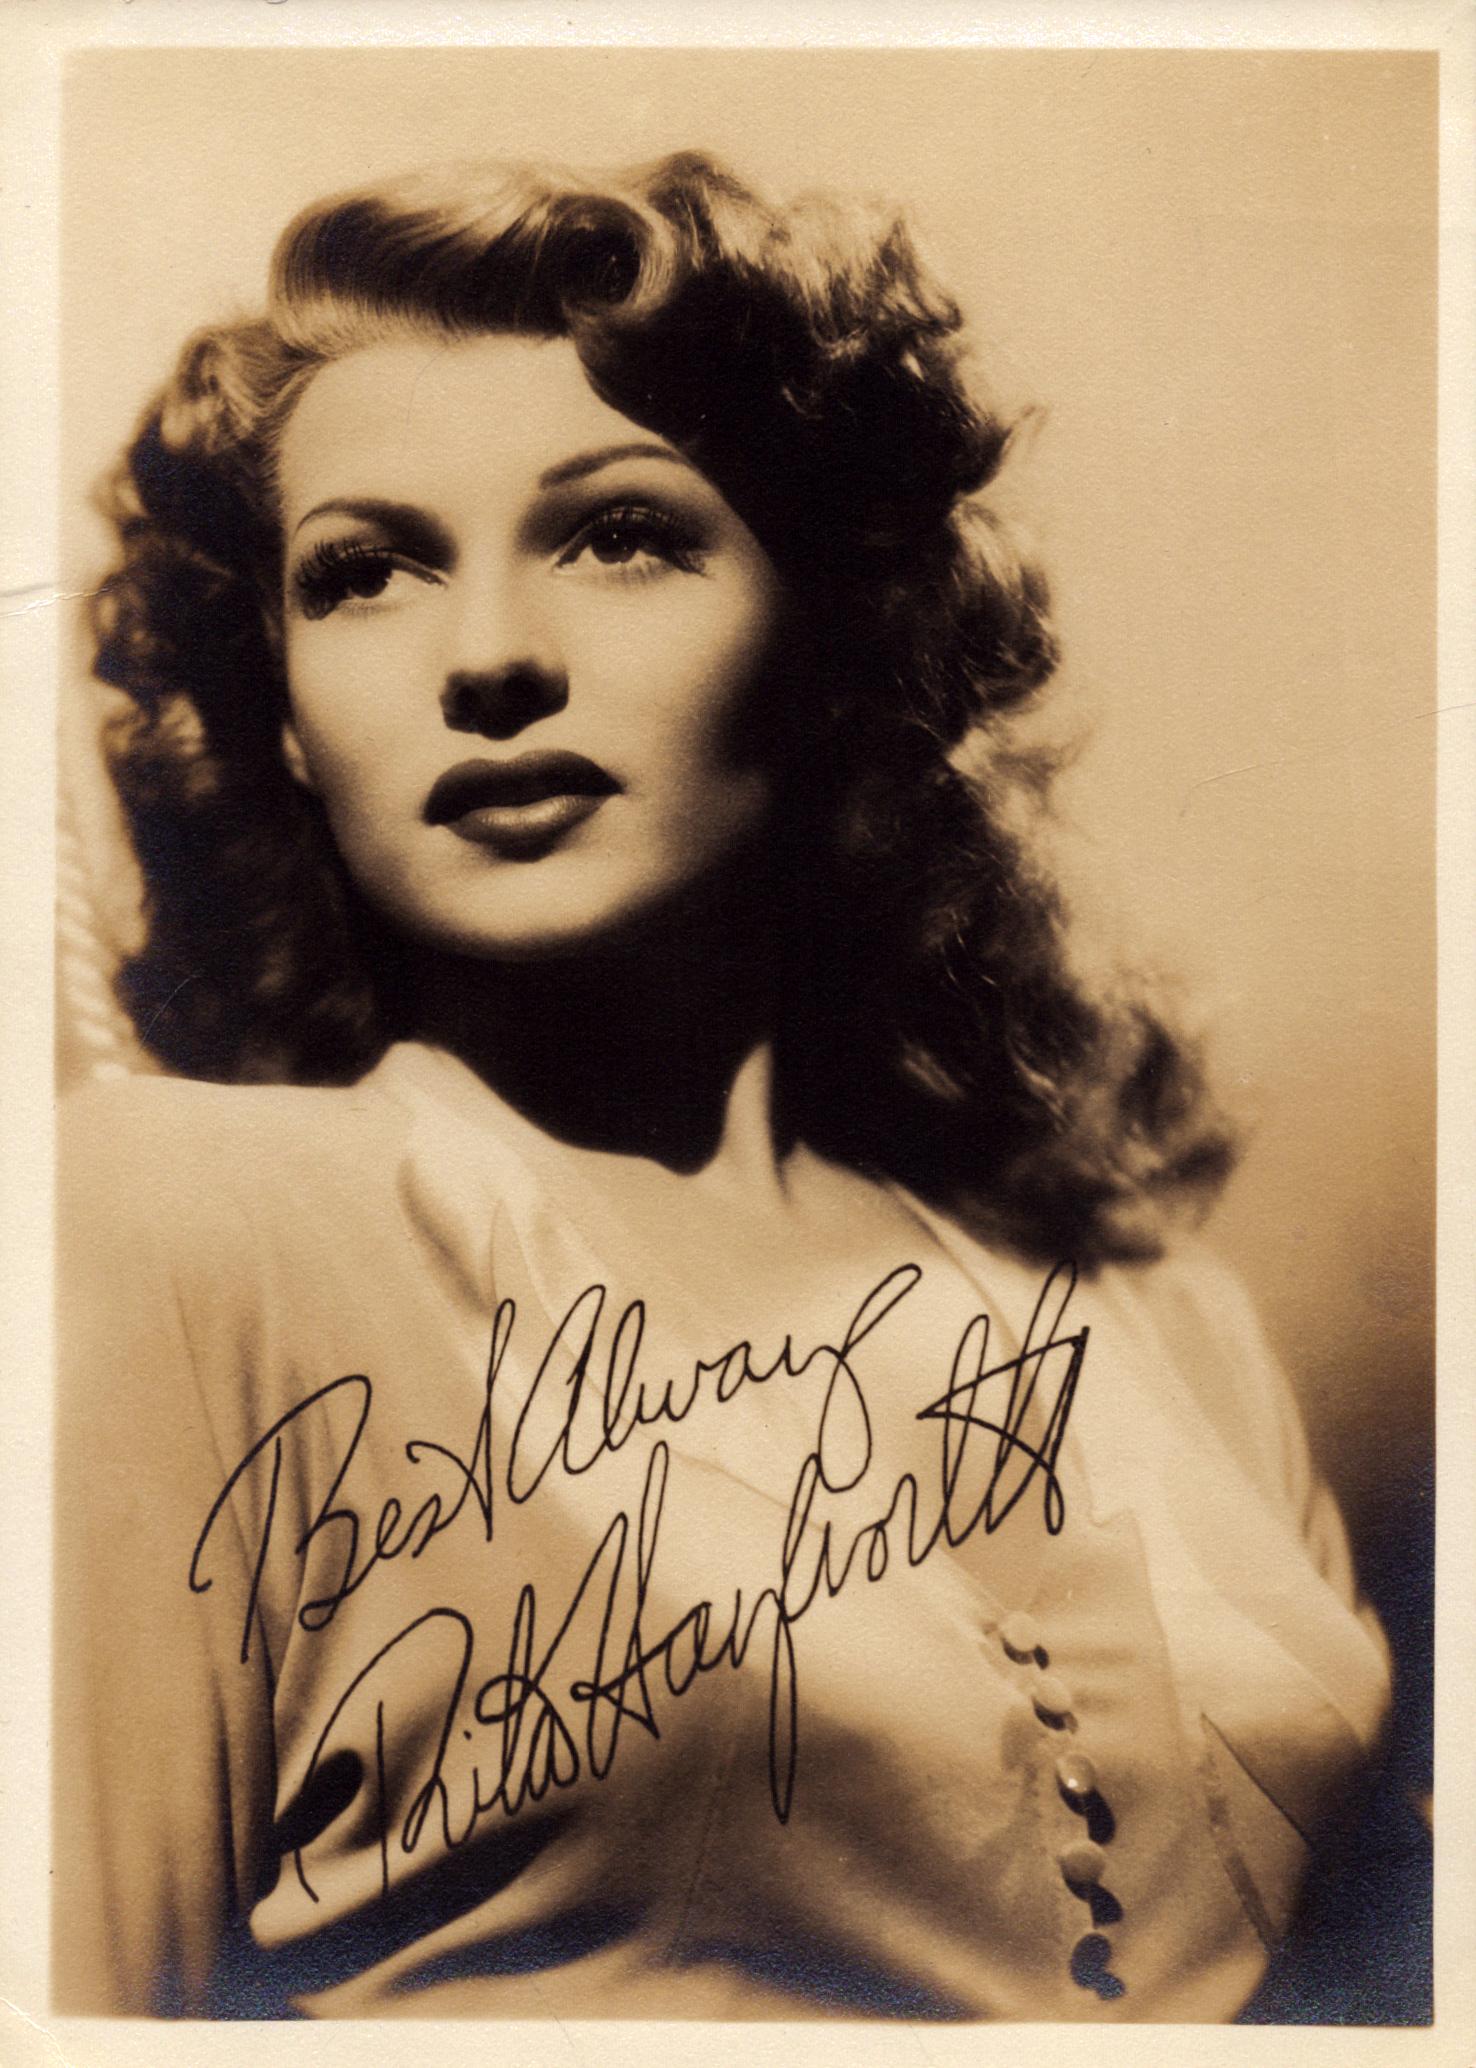 Rita Hayworth signed 7x5 inch vintage sepia photo. Good Condition. All autographs come with a